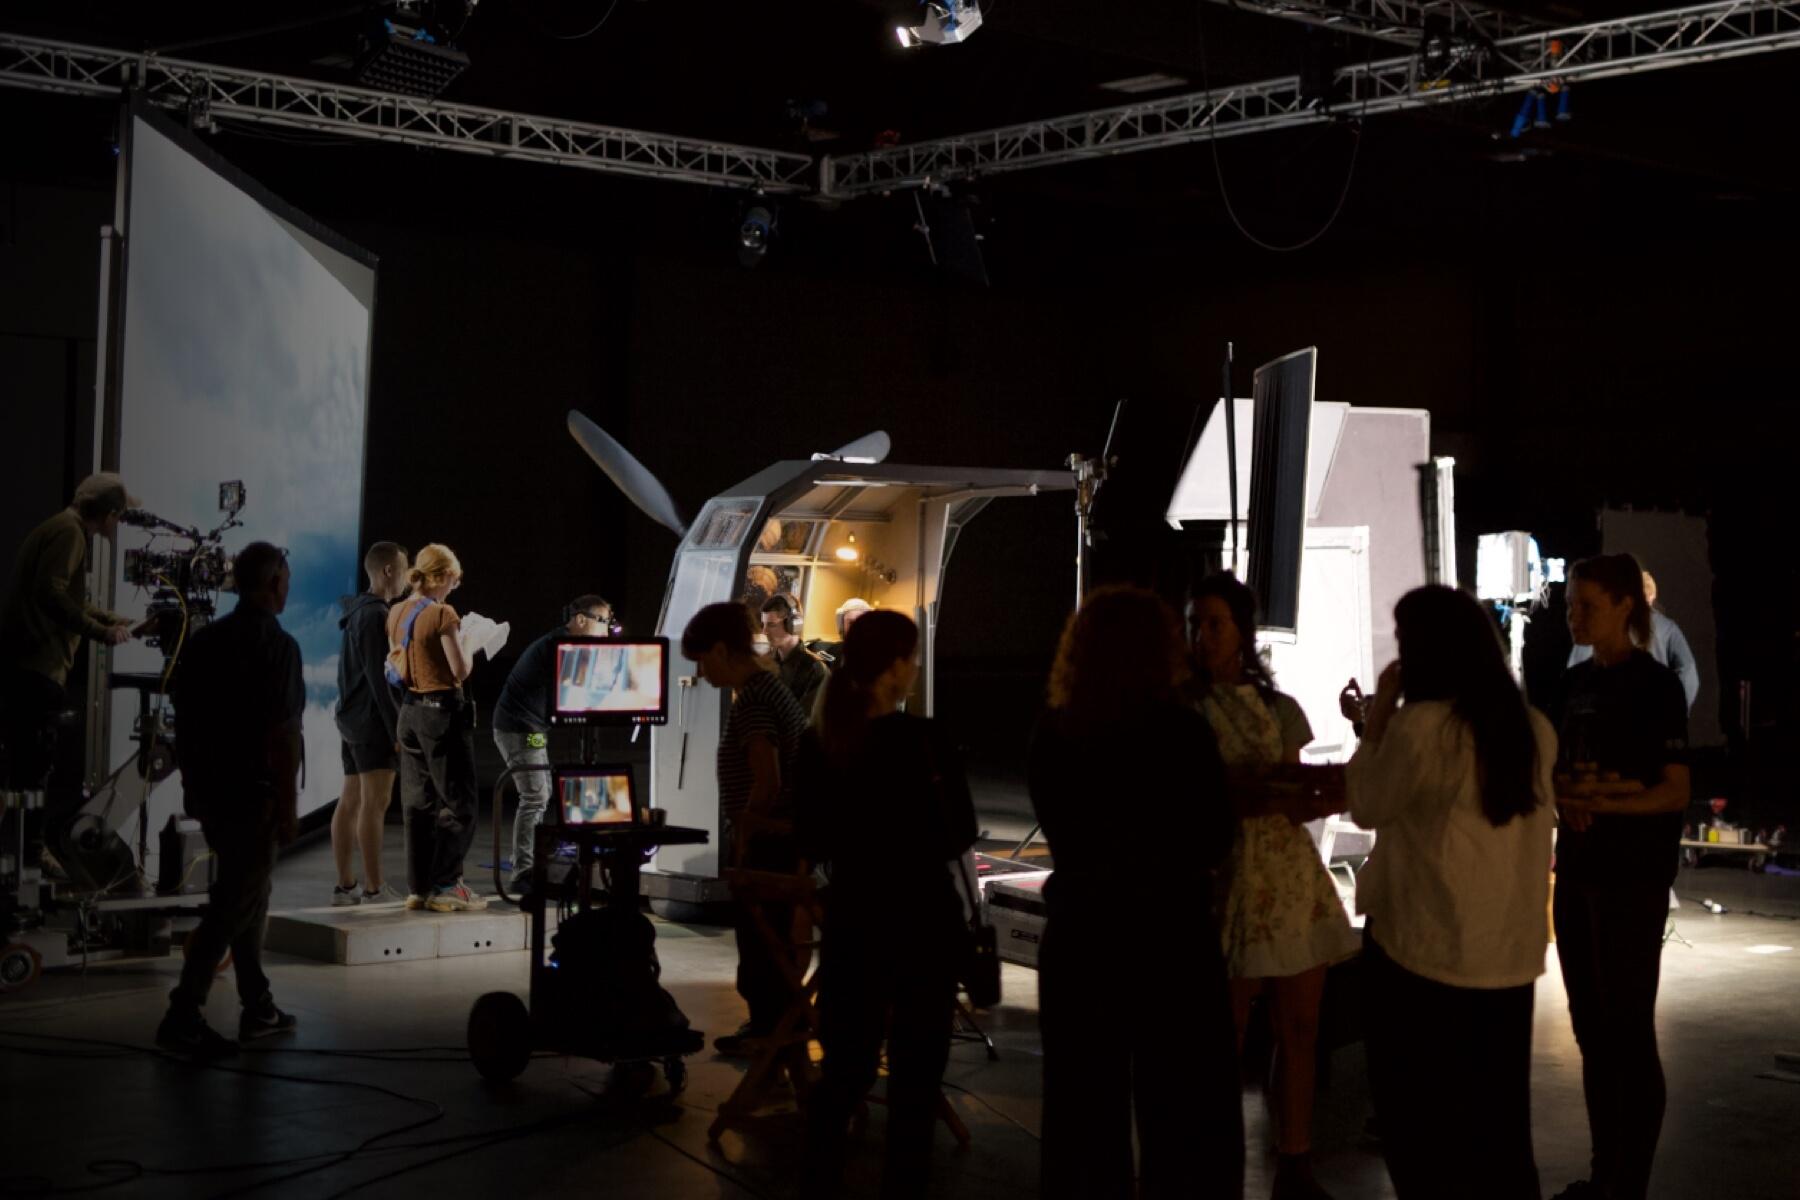 Production set with filming crew